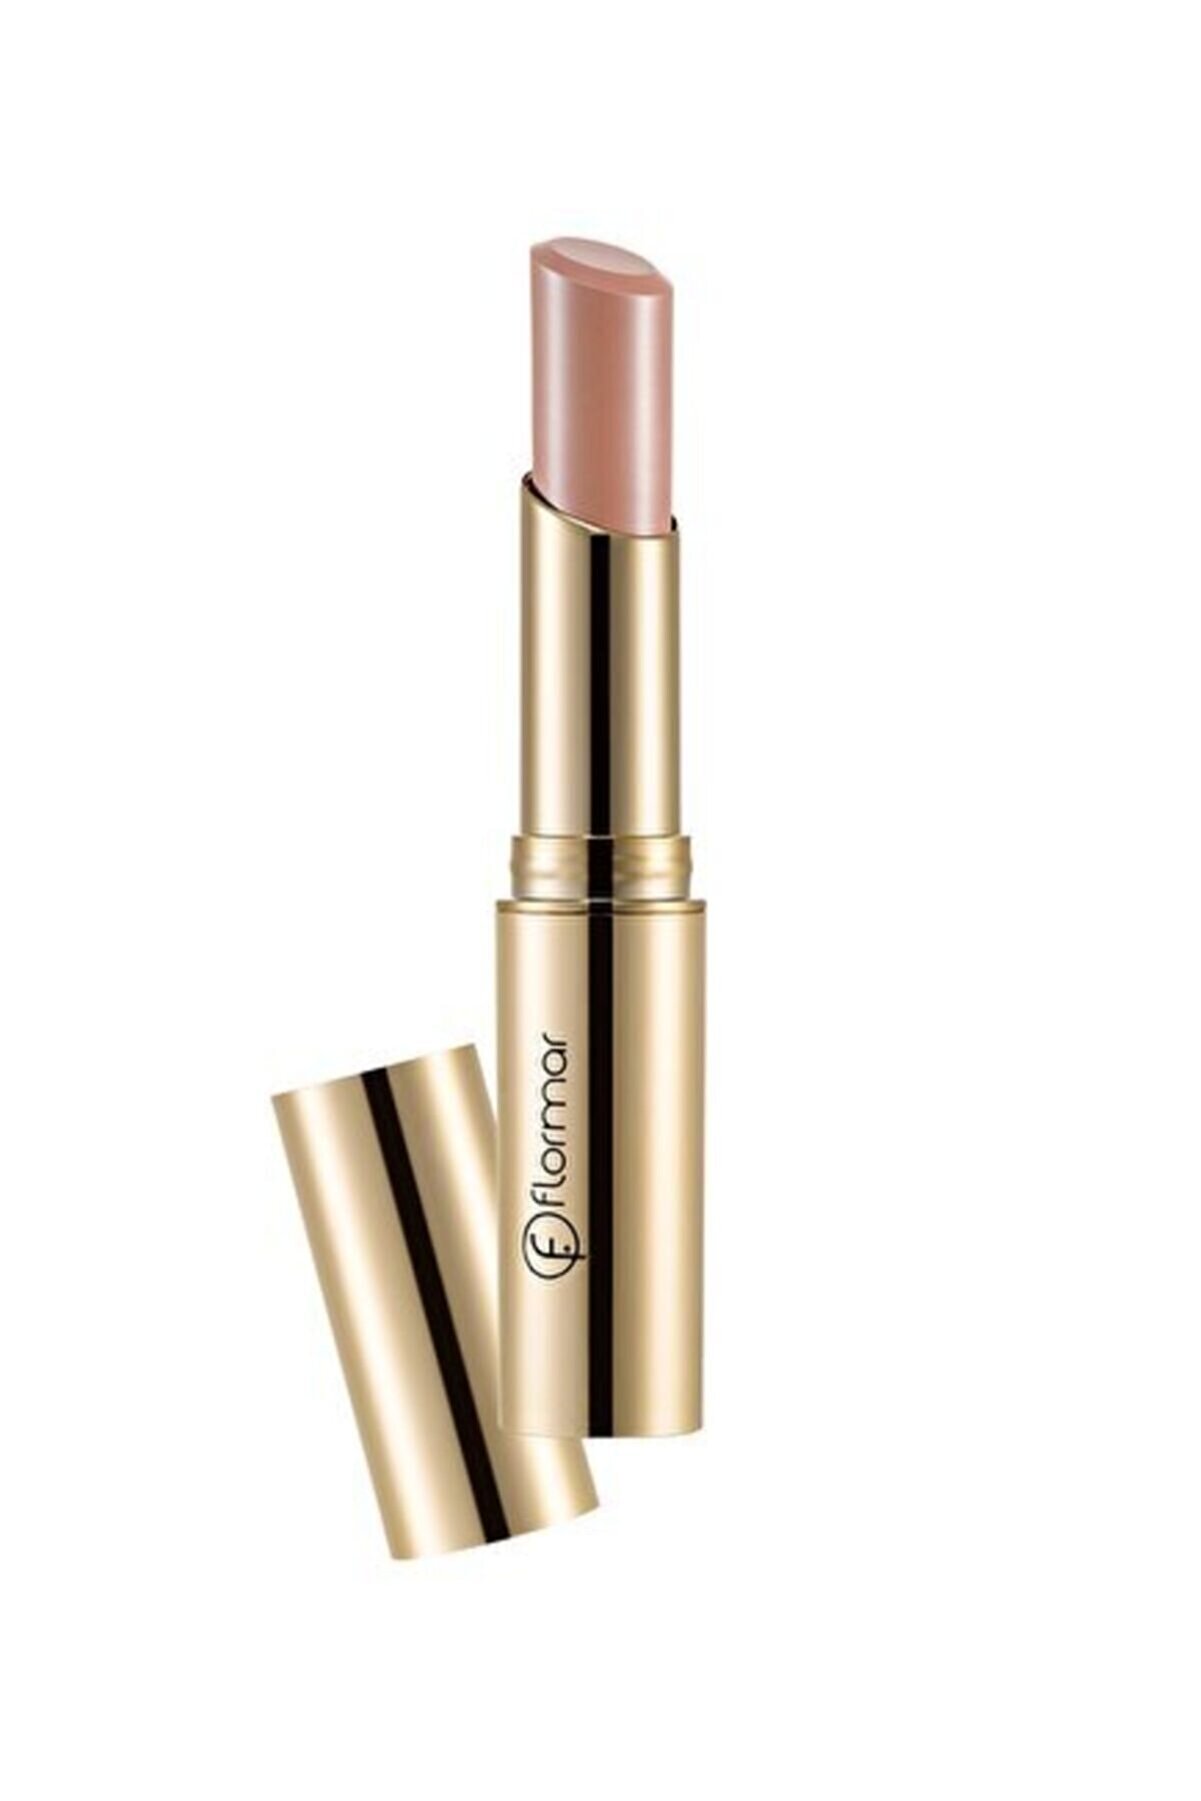 Flormar Deluxe Cashmere Lipstick Stylo Mat Nude Ruj DC2 8690604185306